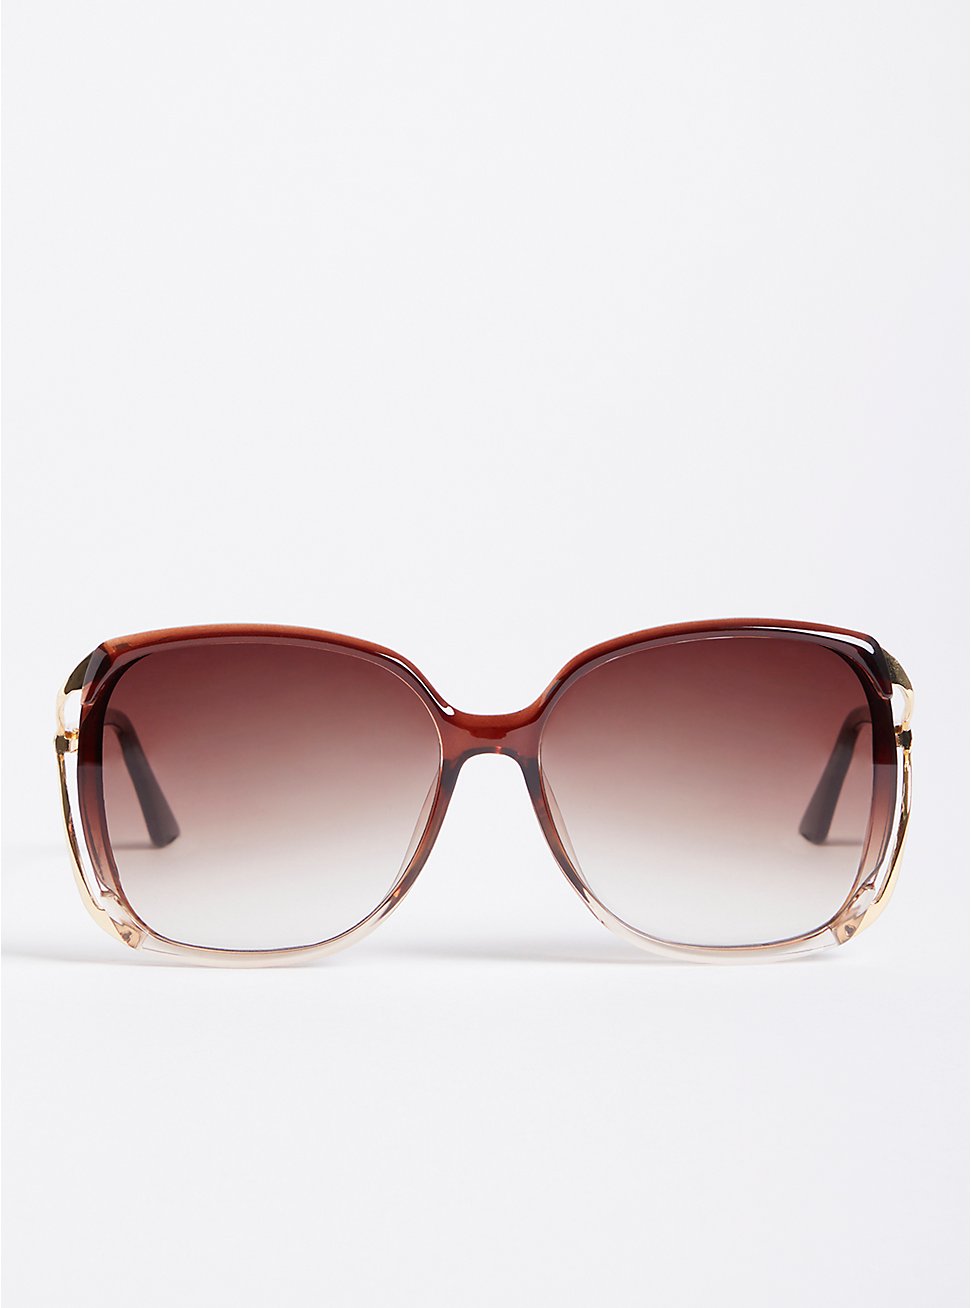 Oversized Square Sunglasses - Neutral with Side Cut Out, , hi-res